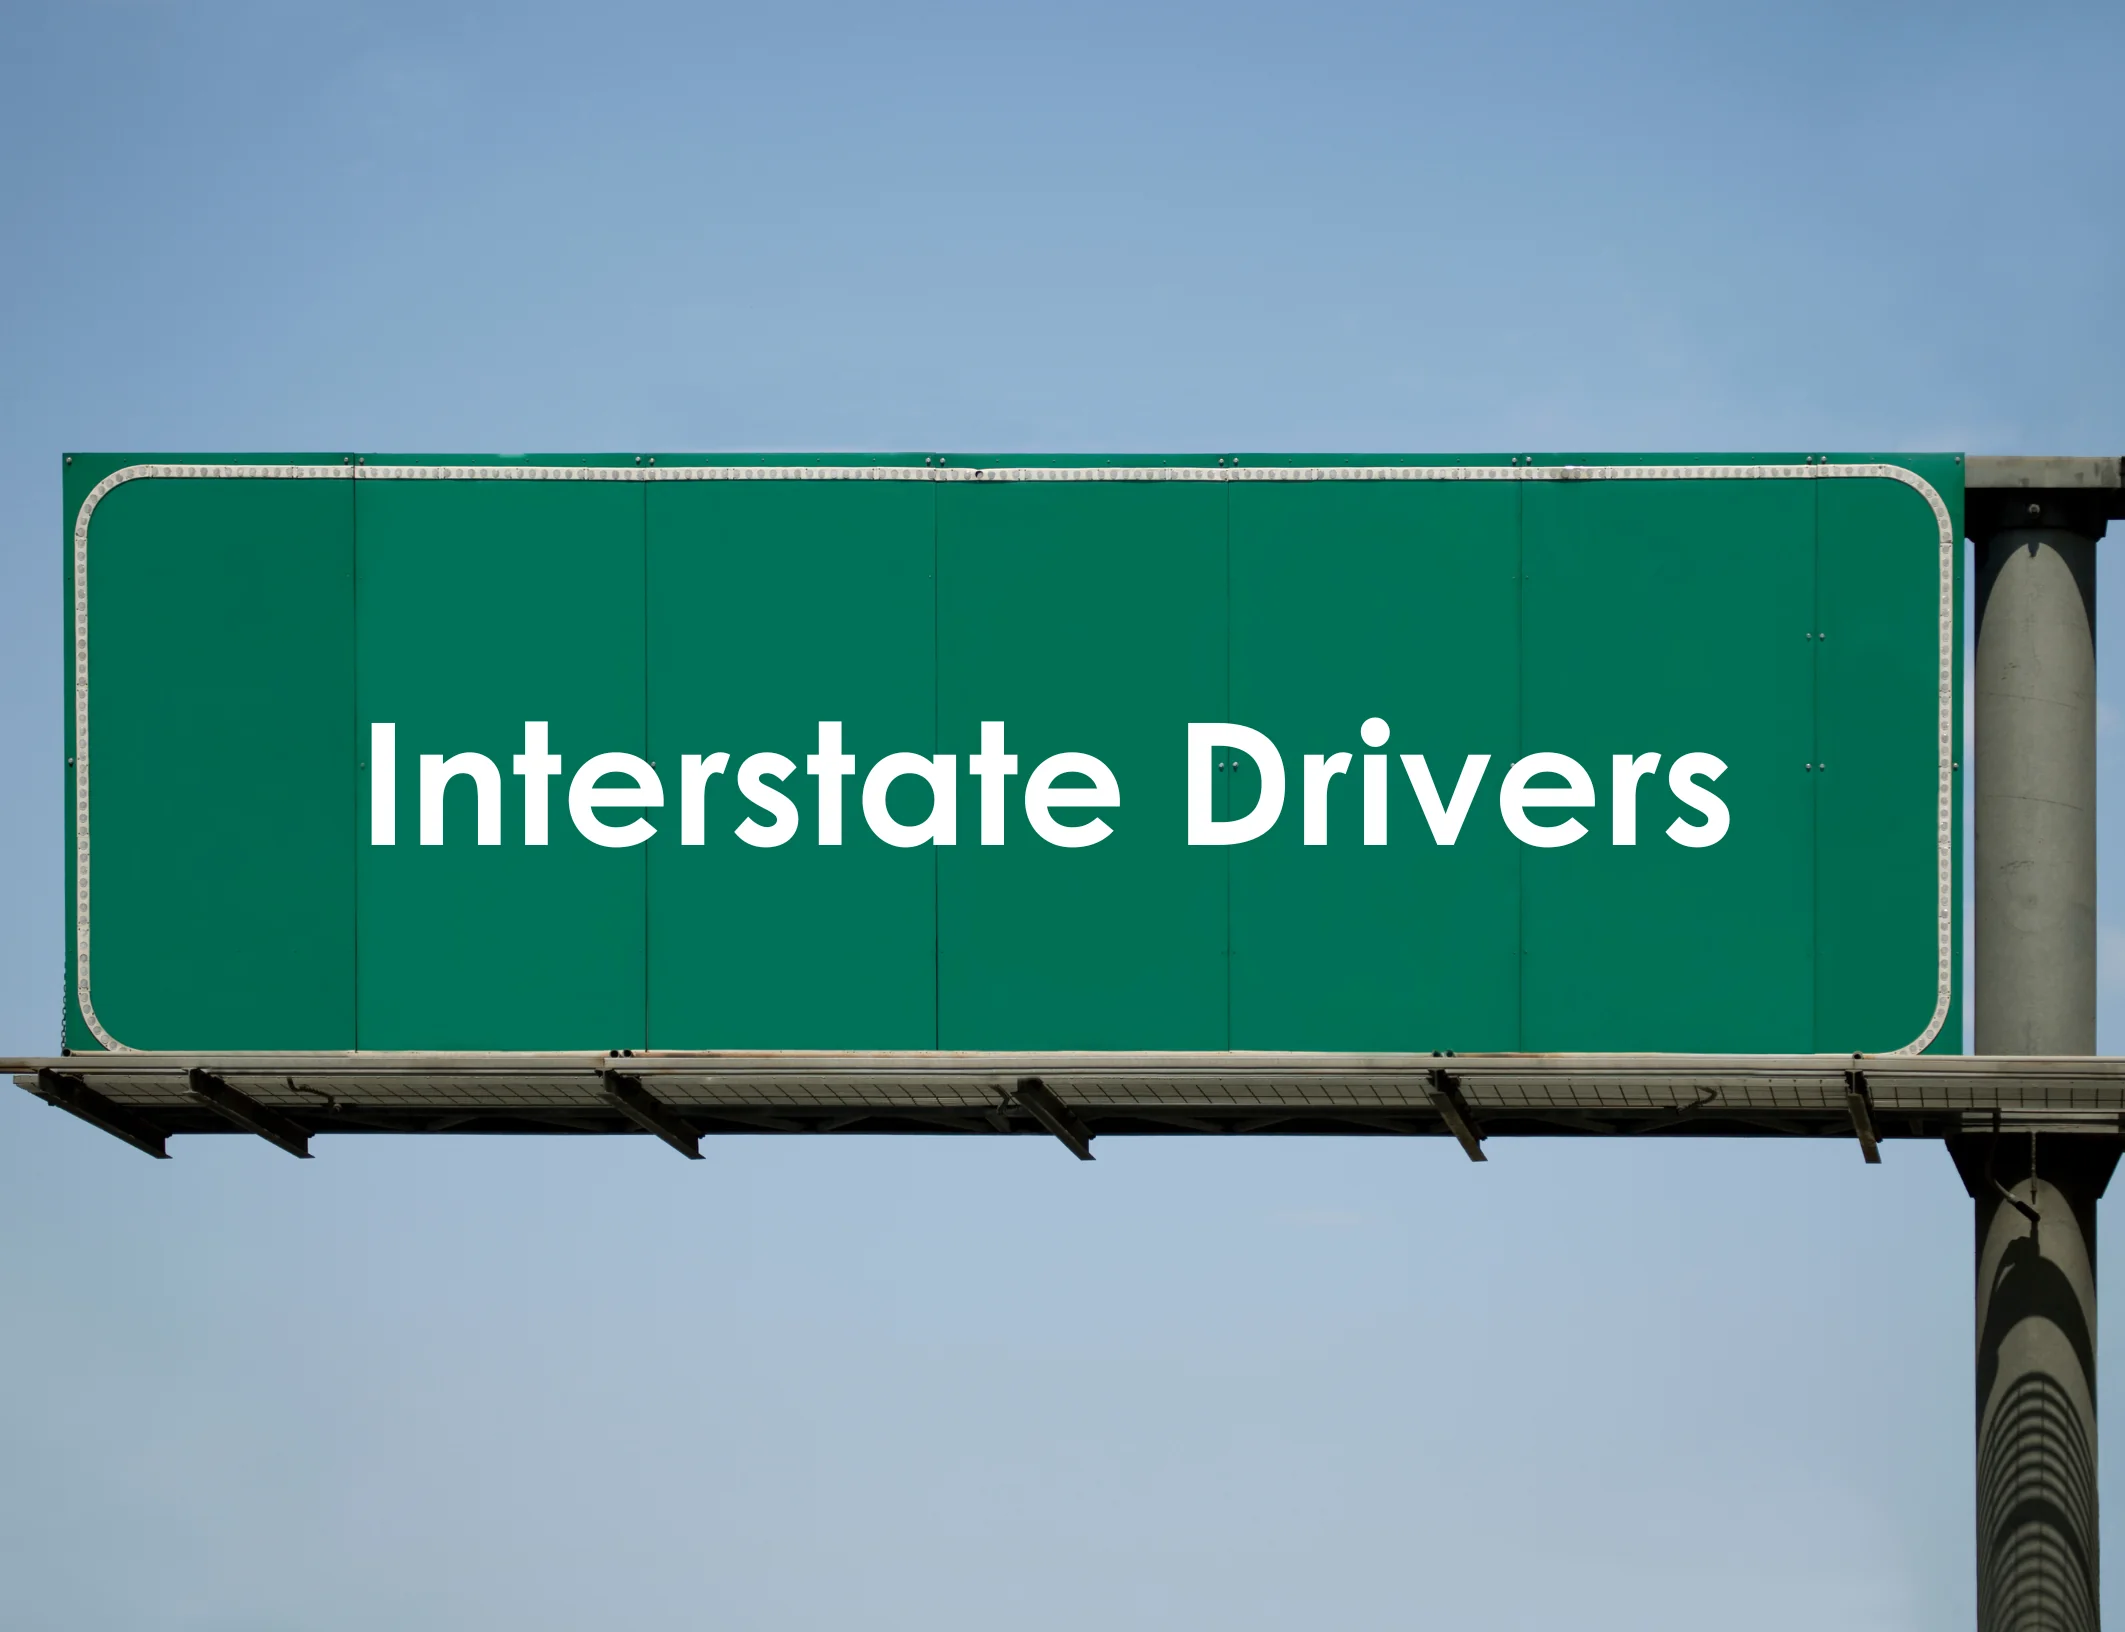 Interstate Drivers-green-interstate-sign-with-title-on-it